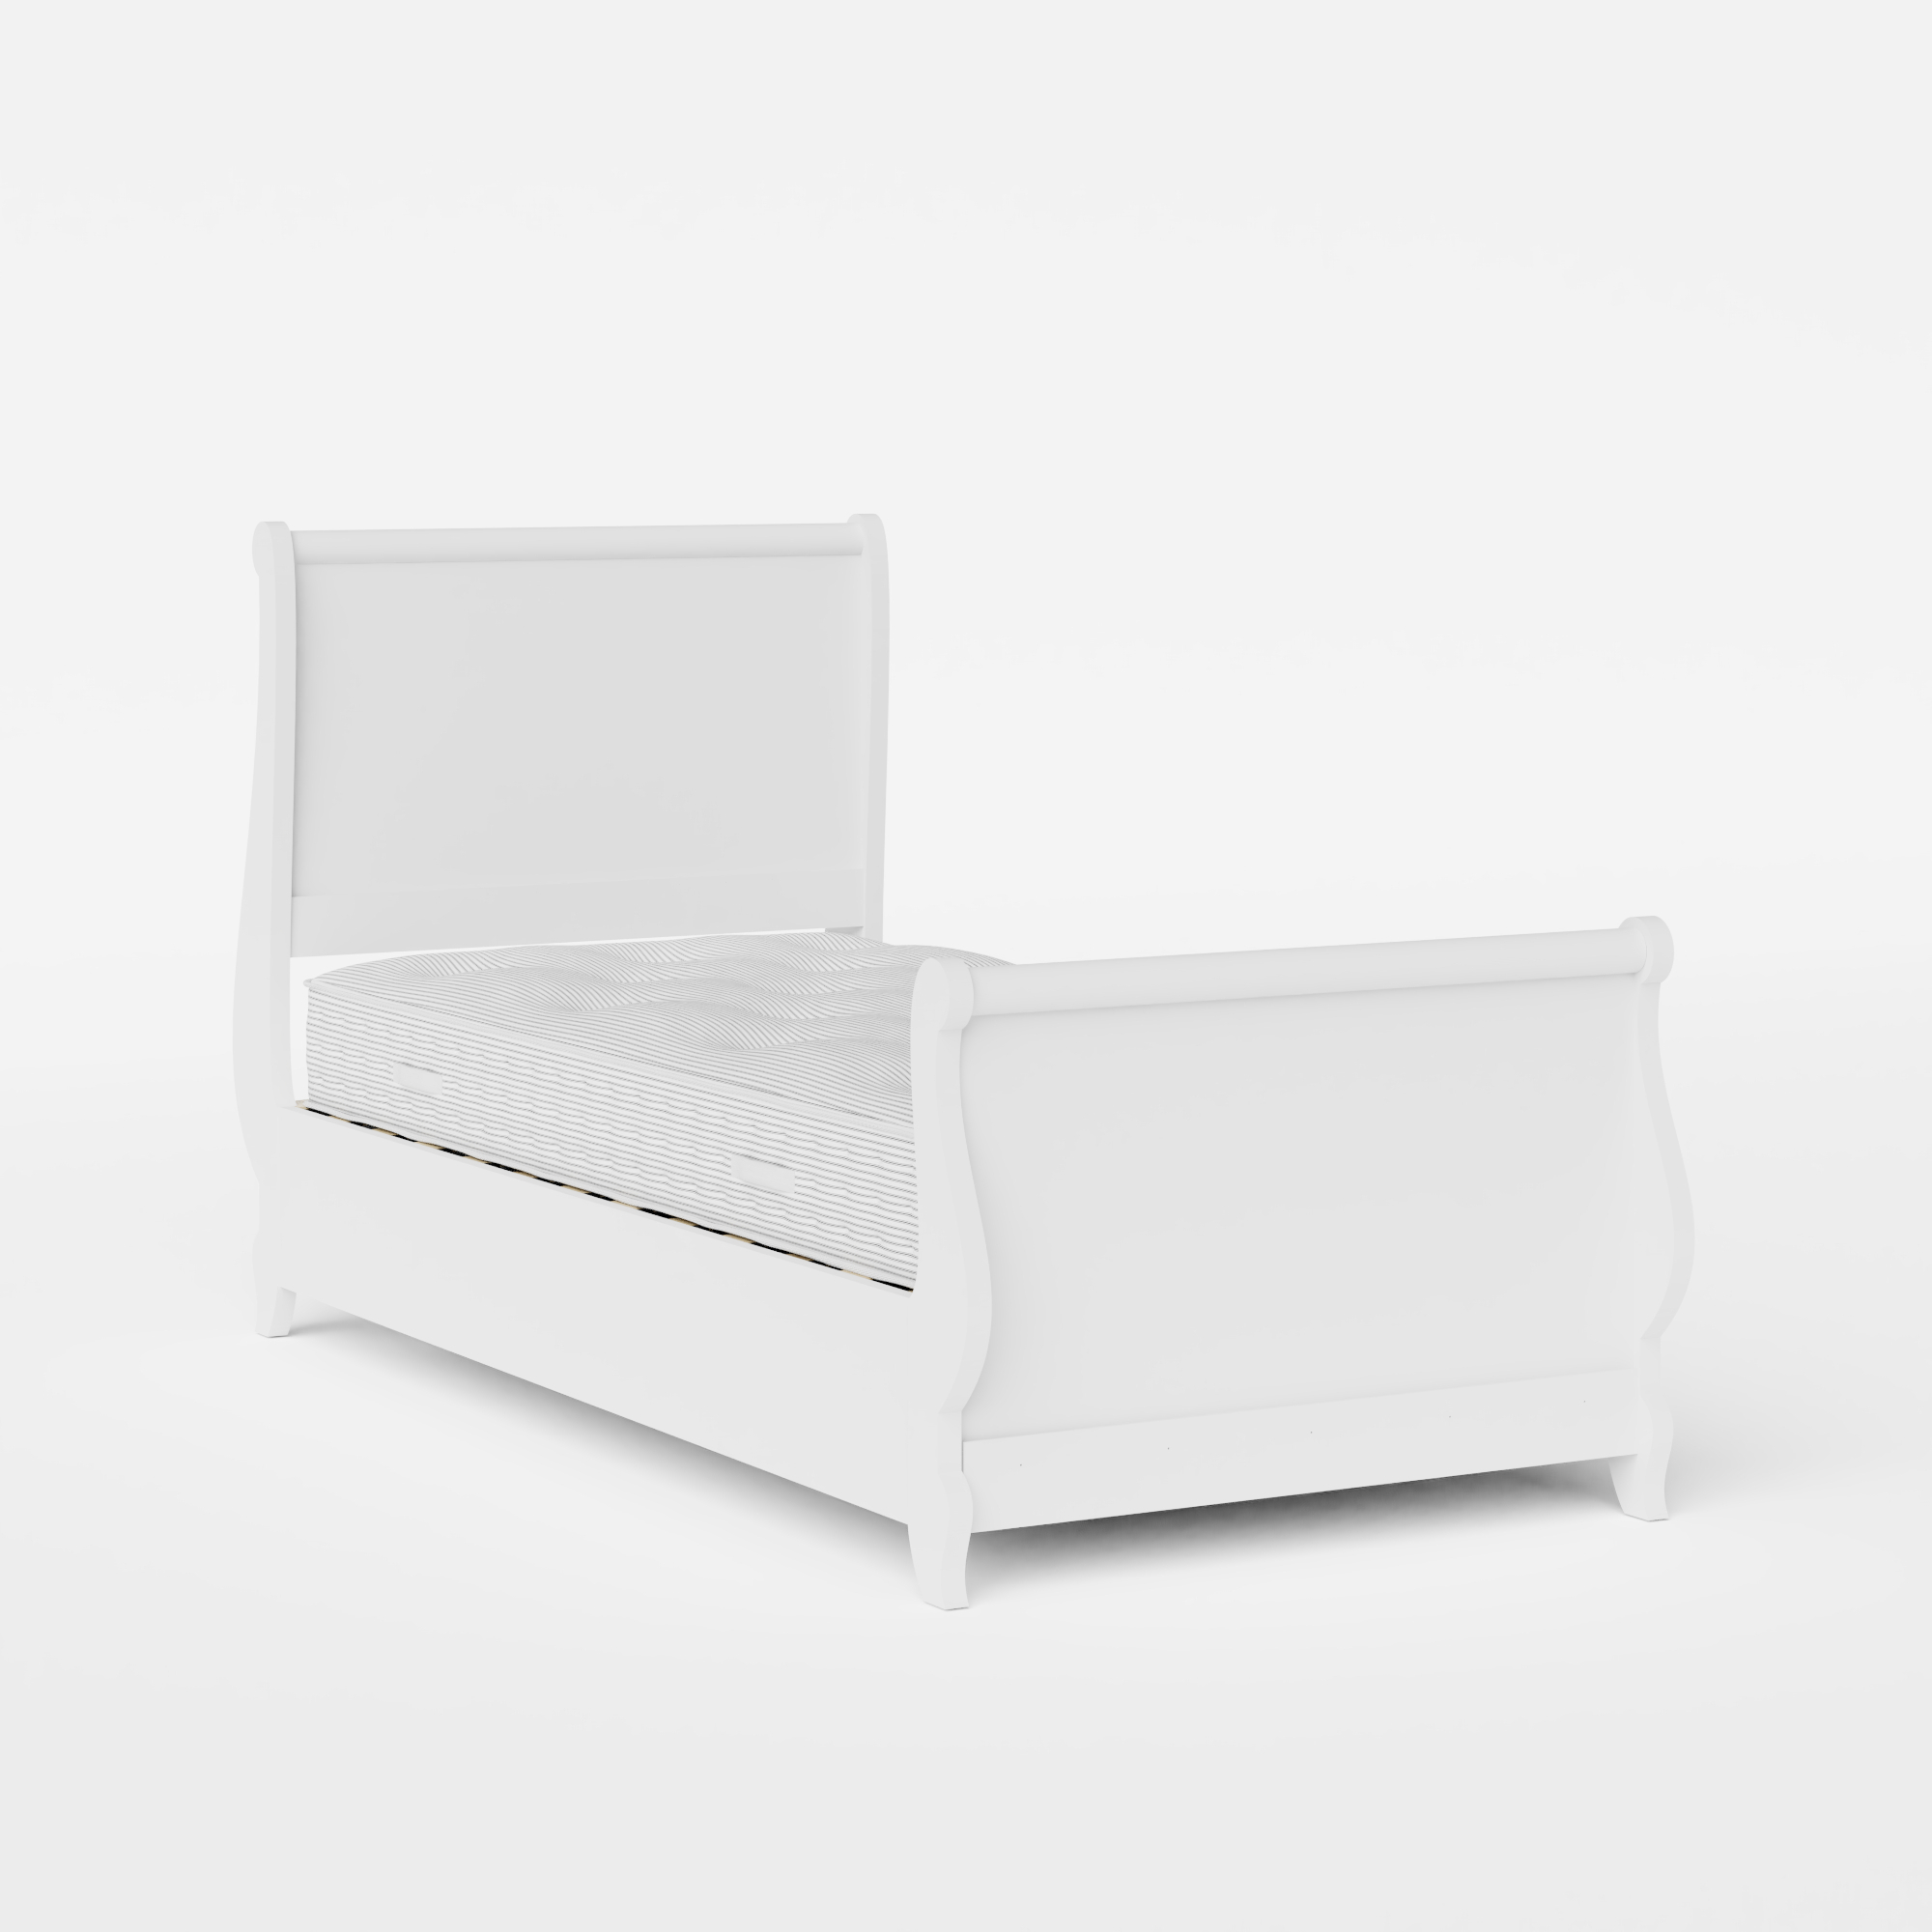 Elliot Painted single painted wood bed in white with Juno mattress